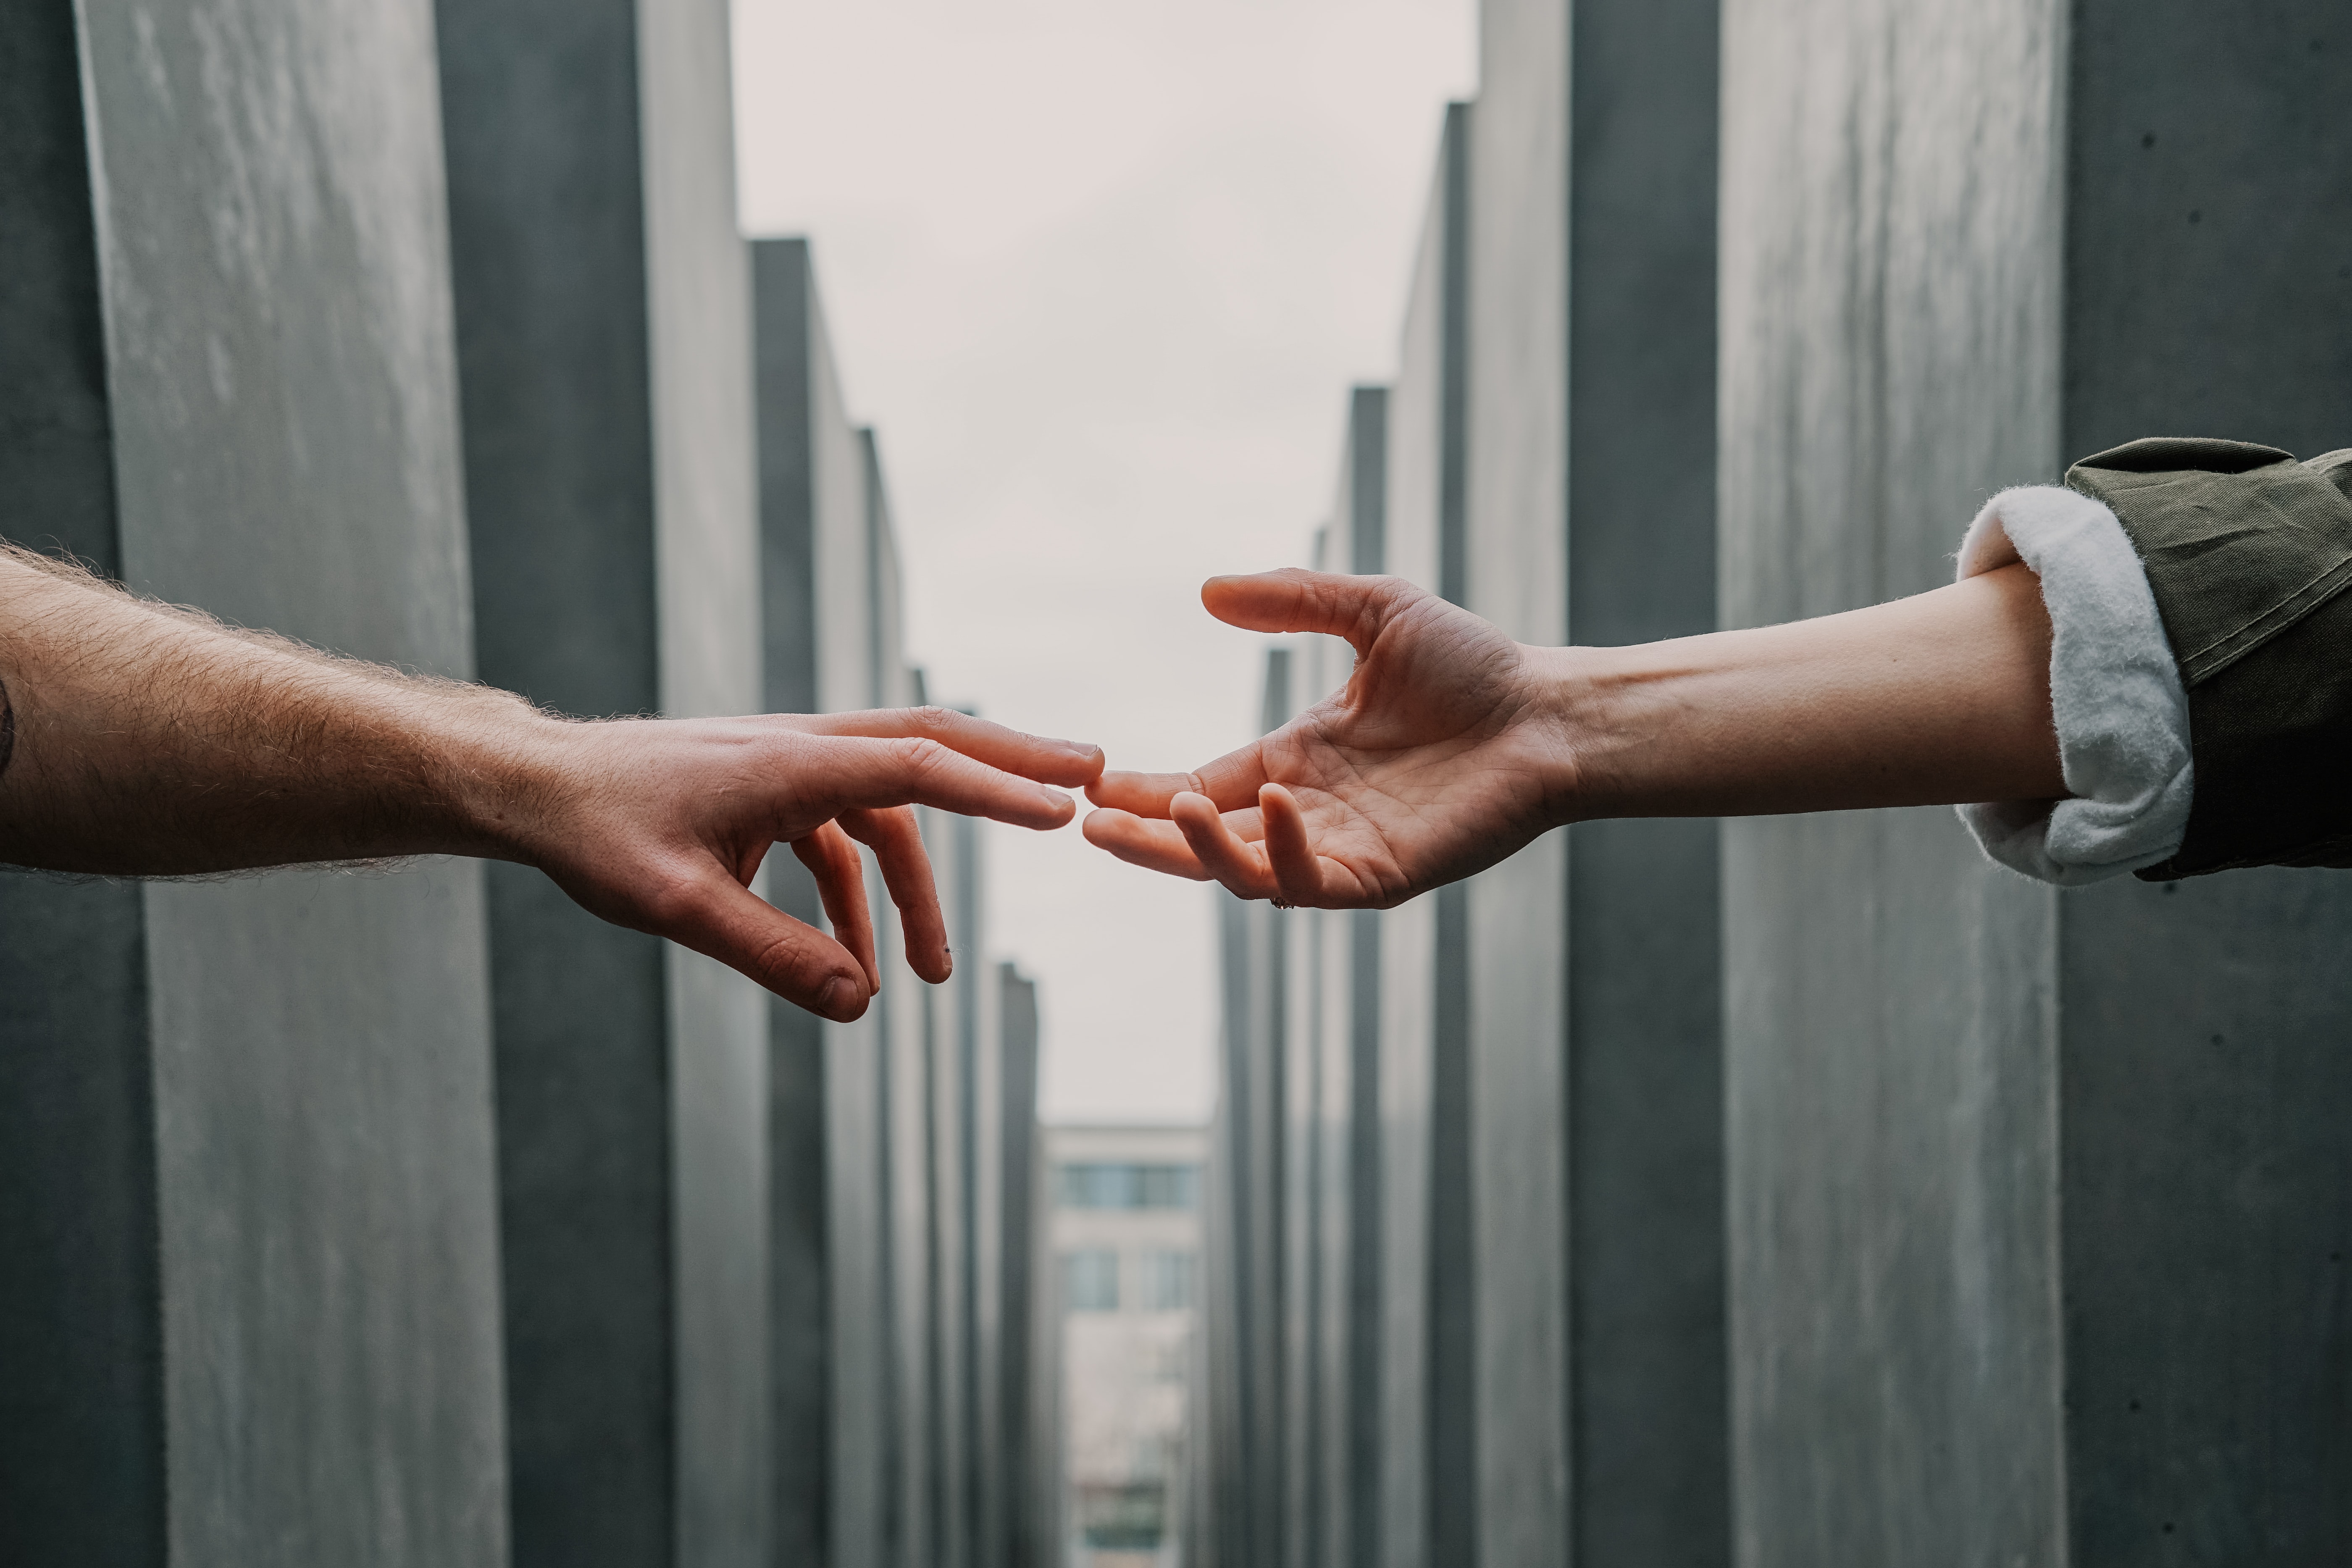 Twohands reaching for each other; image by Toa Heftiba, bia Unsplash.com.